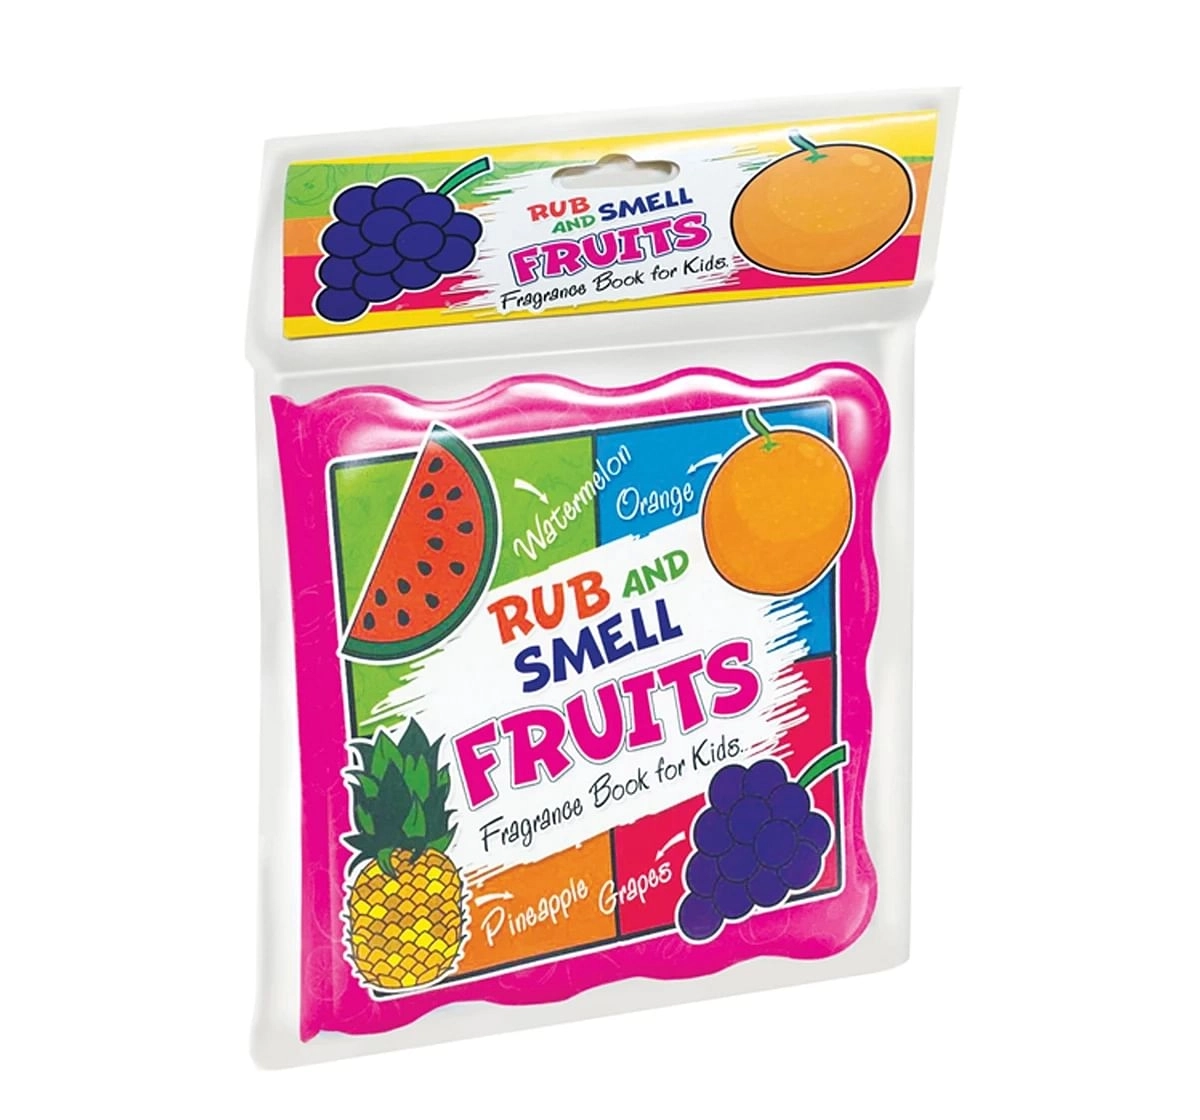 Dreamland Rub and Smell Fruits Books for Kids 3Y+, Multicolour